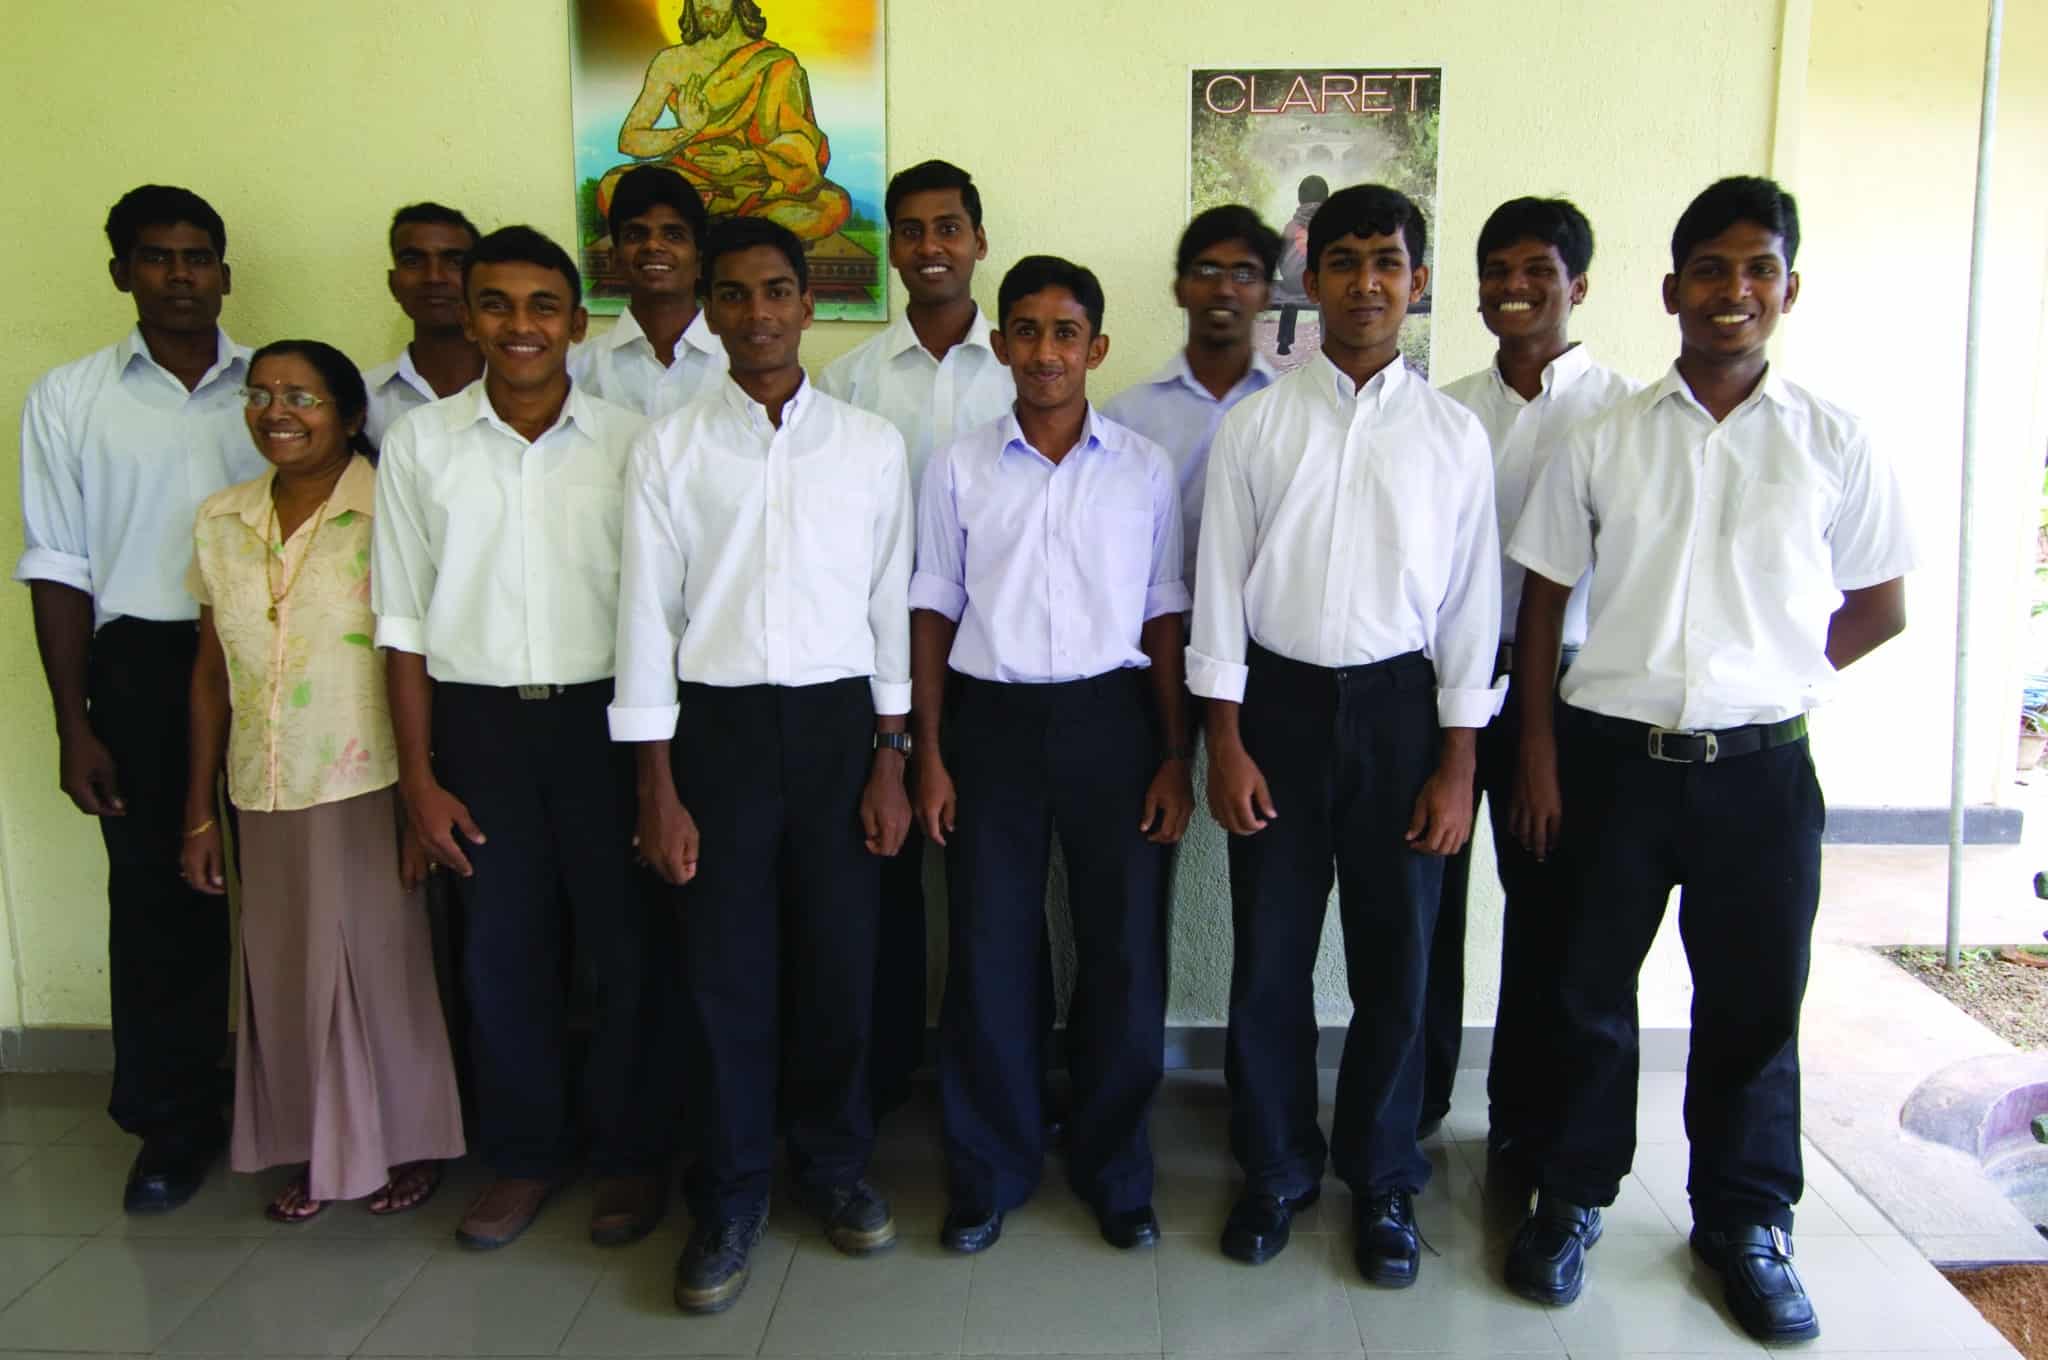 The 11 young seminarians now studying English at the Claretian Intermediate Seminary in western Sri Lanka. These seminarians study english for a year or two at this facility before heading on to do their coursework at the National Seminary in the city of Kandy.